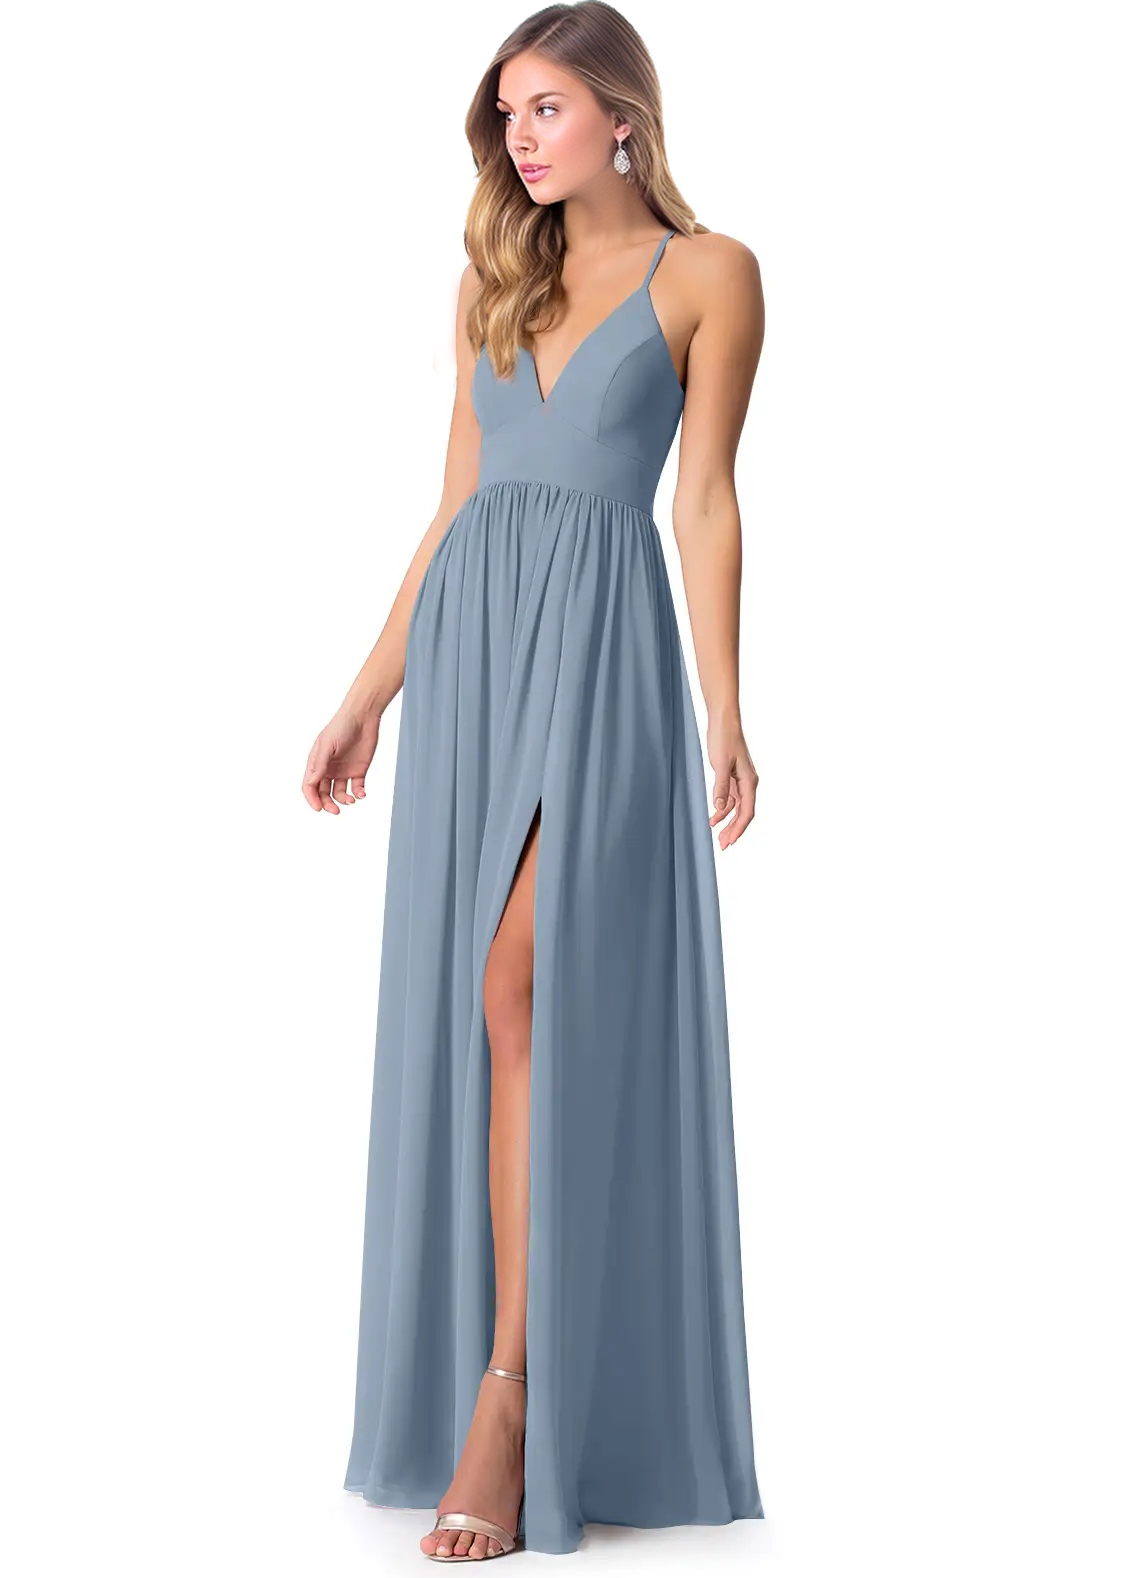 Chiffon Open Back Bridesmaid Dresses With Split Front